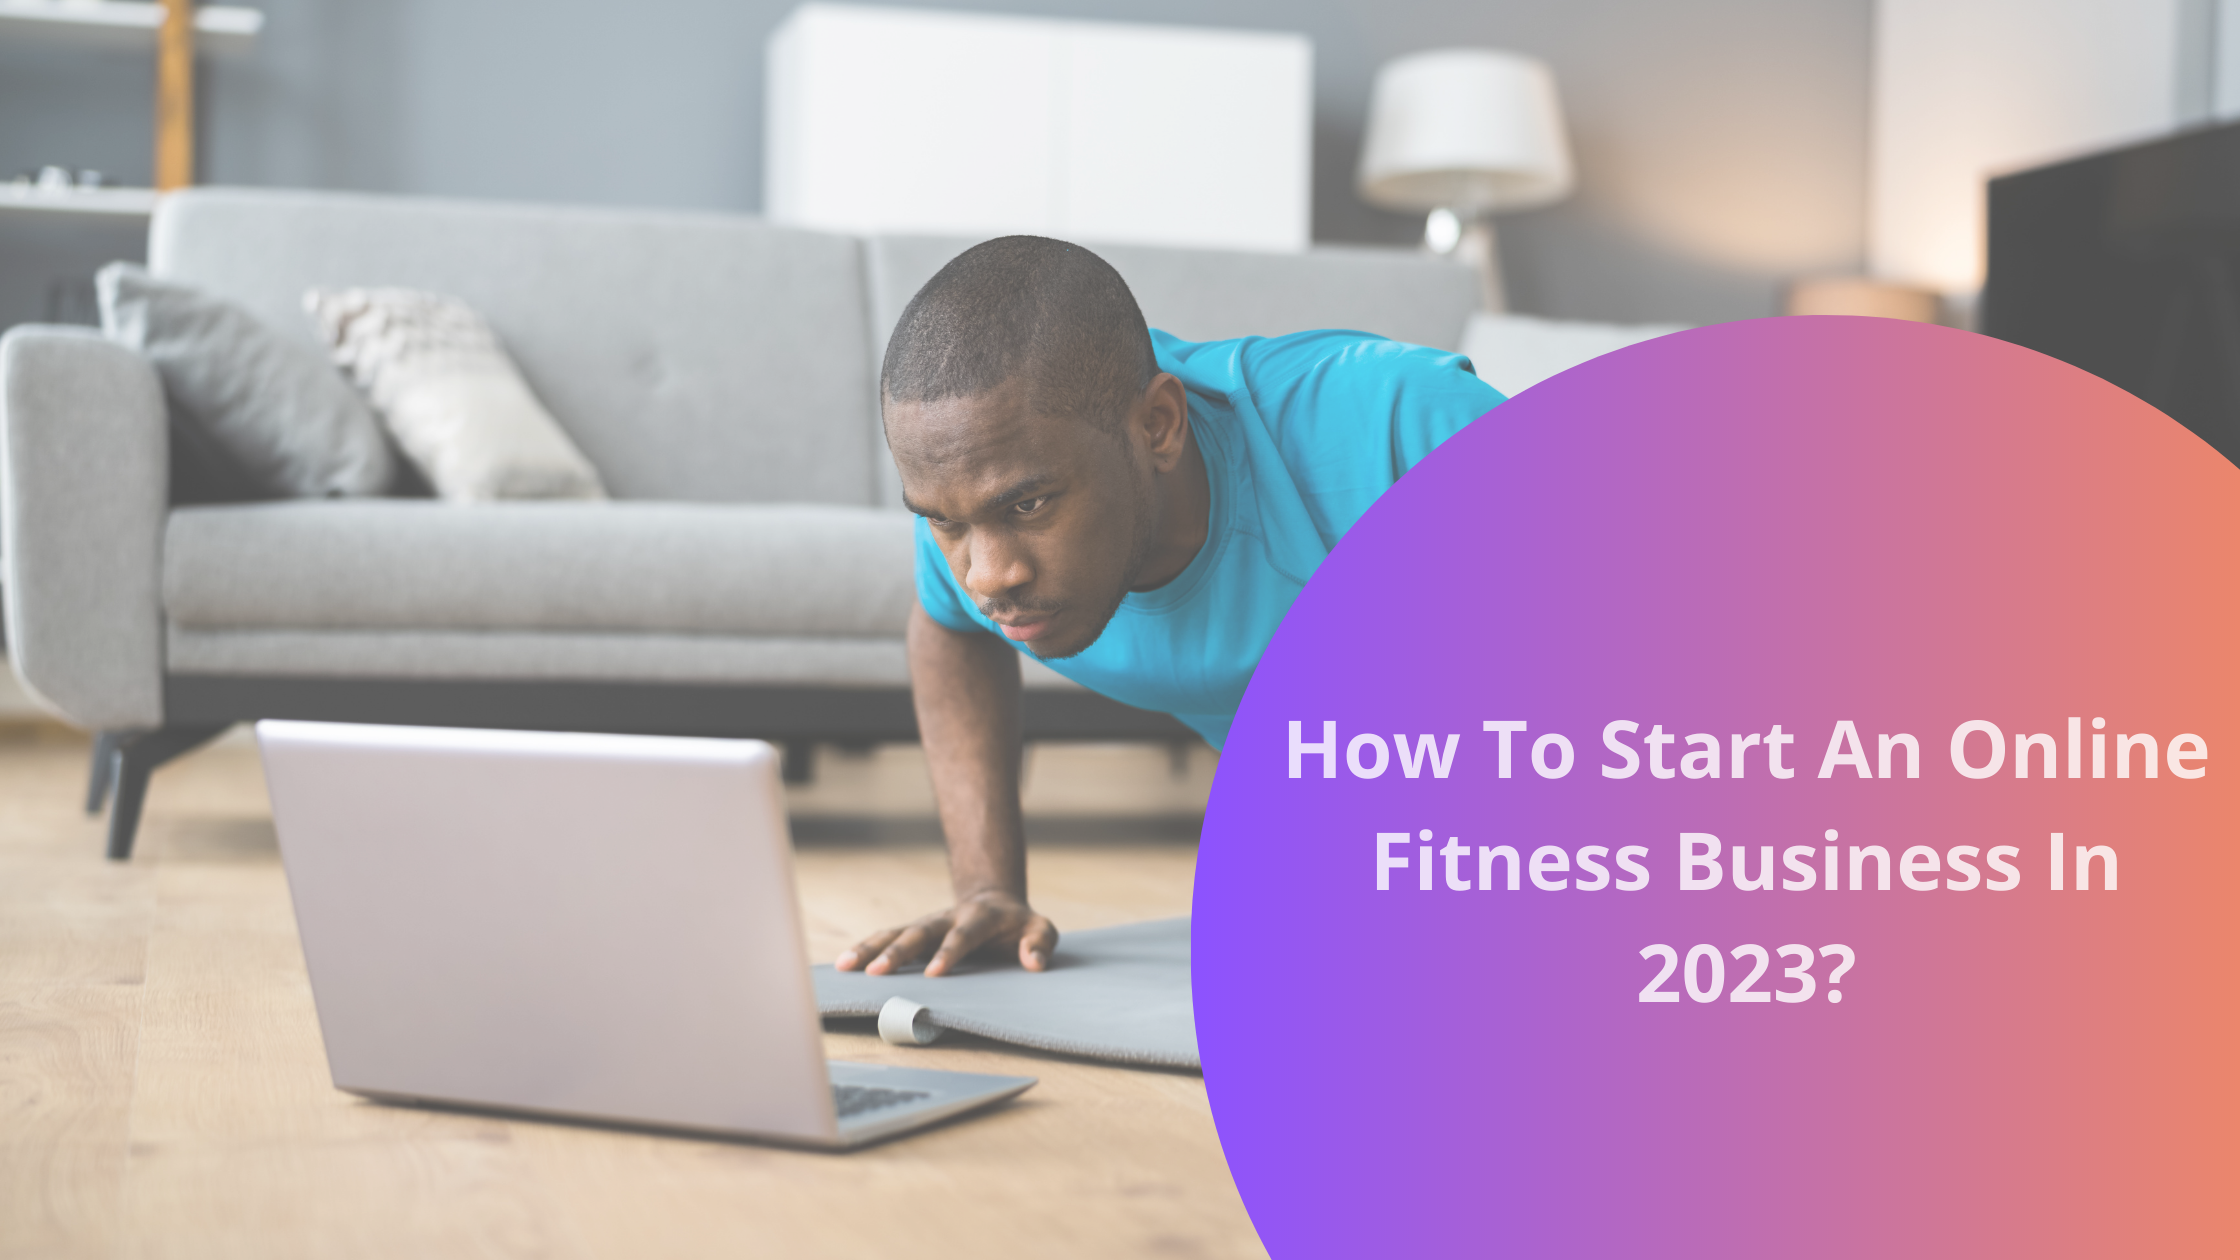 Online fitness business